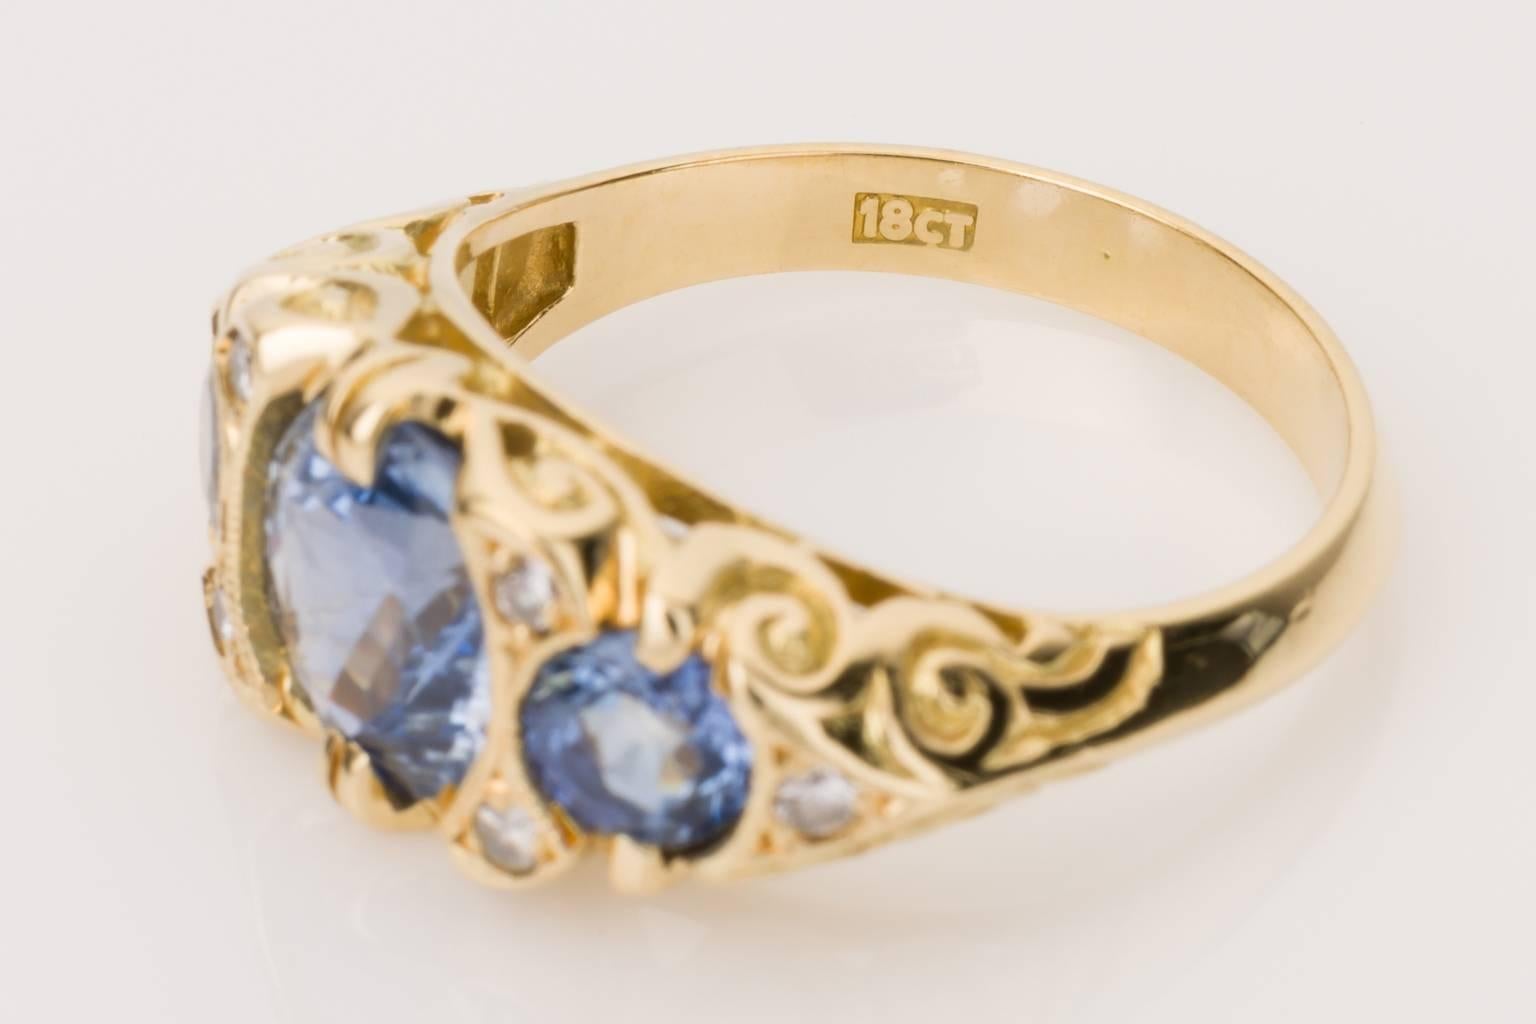 Do you love sapphires that have the most superb blue & lilac tones? Then this ring is for you. An 18k yellow gold London Bridge style ring with detailed filigree sides, containing three claw set Ceylon sapphires and six grain set diamonds mounted